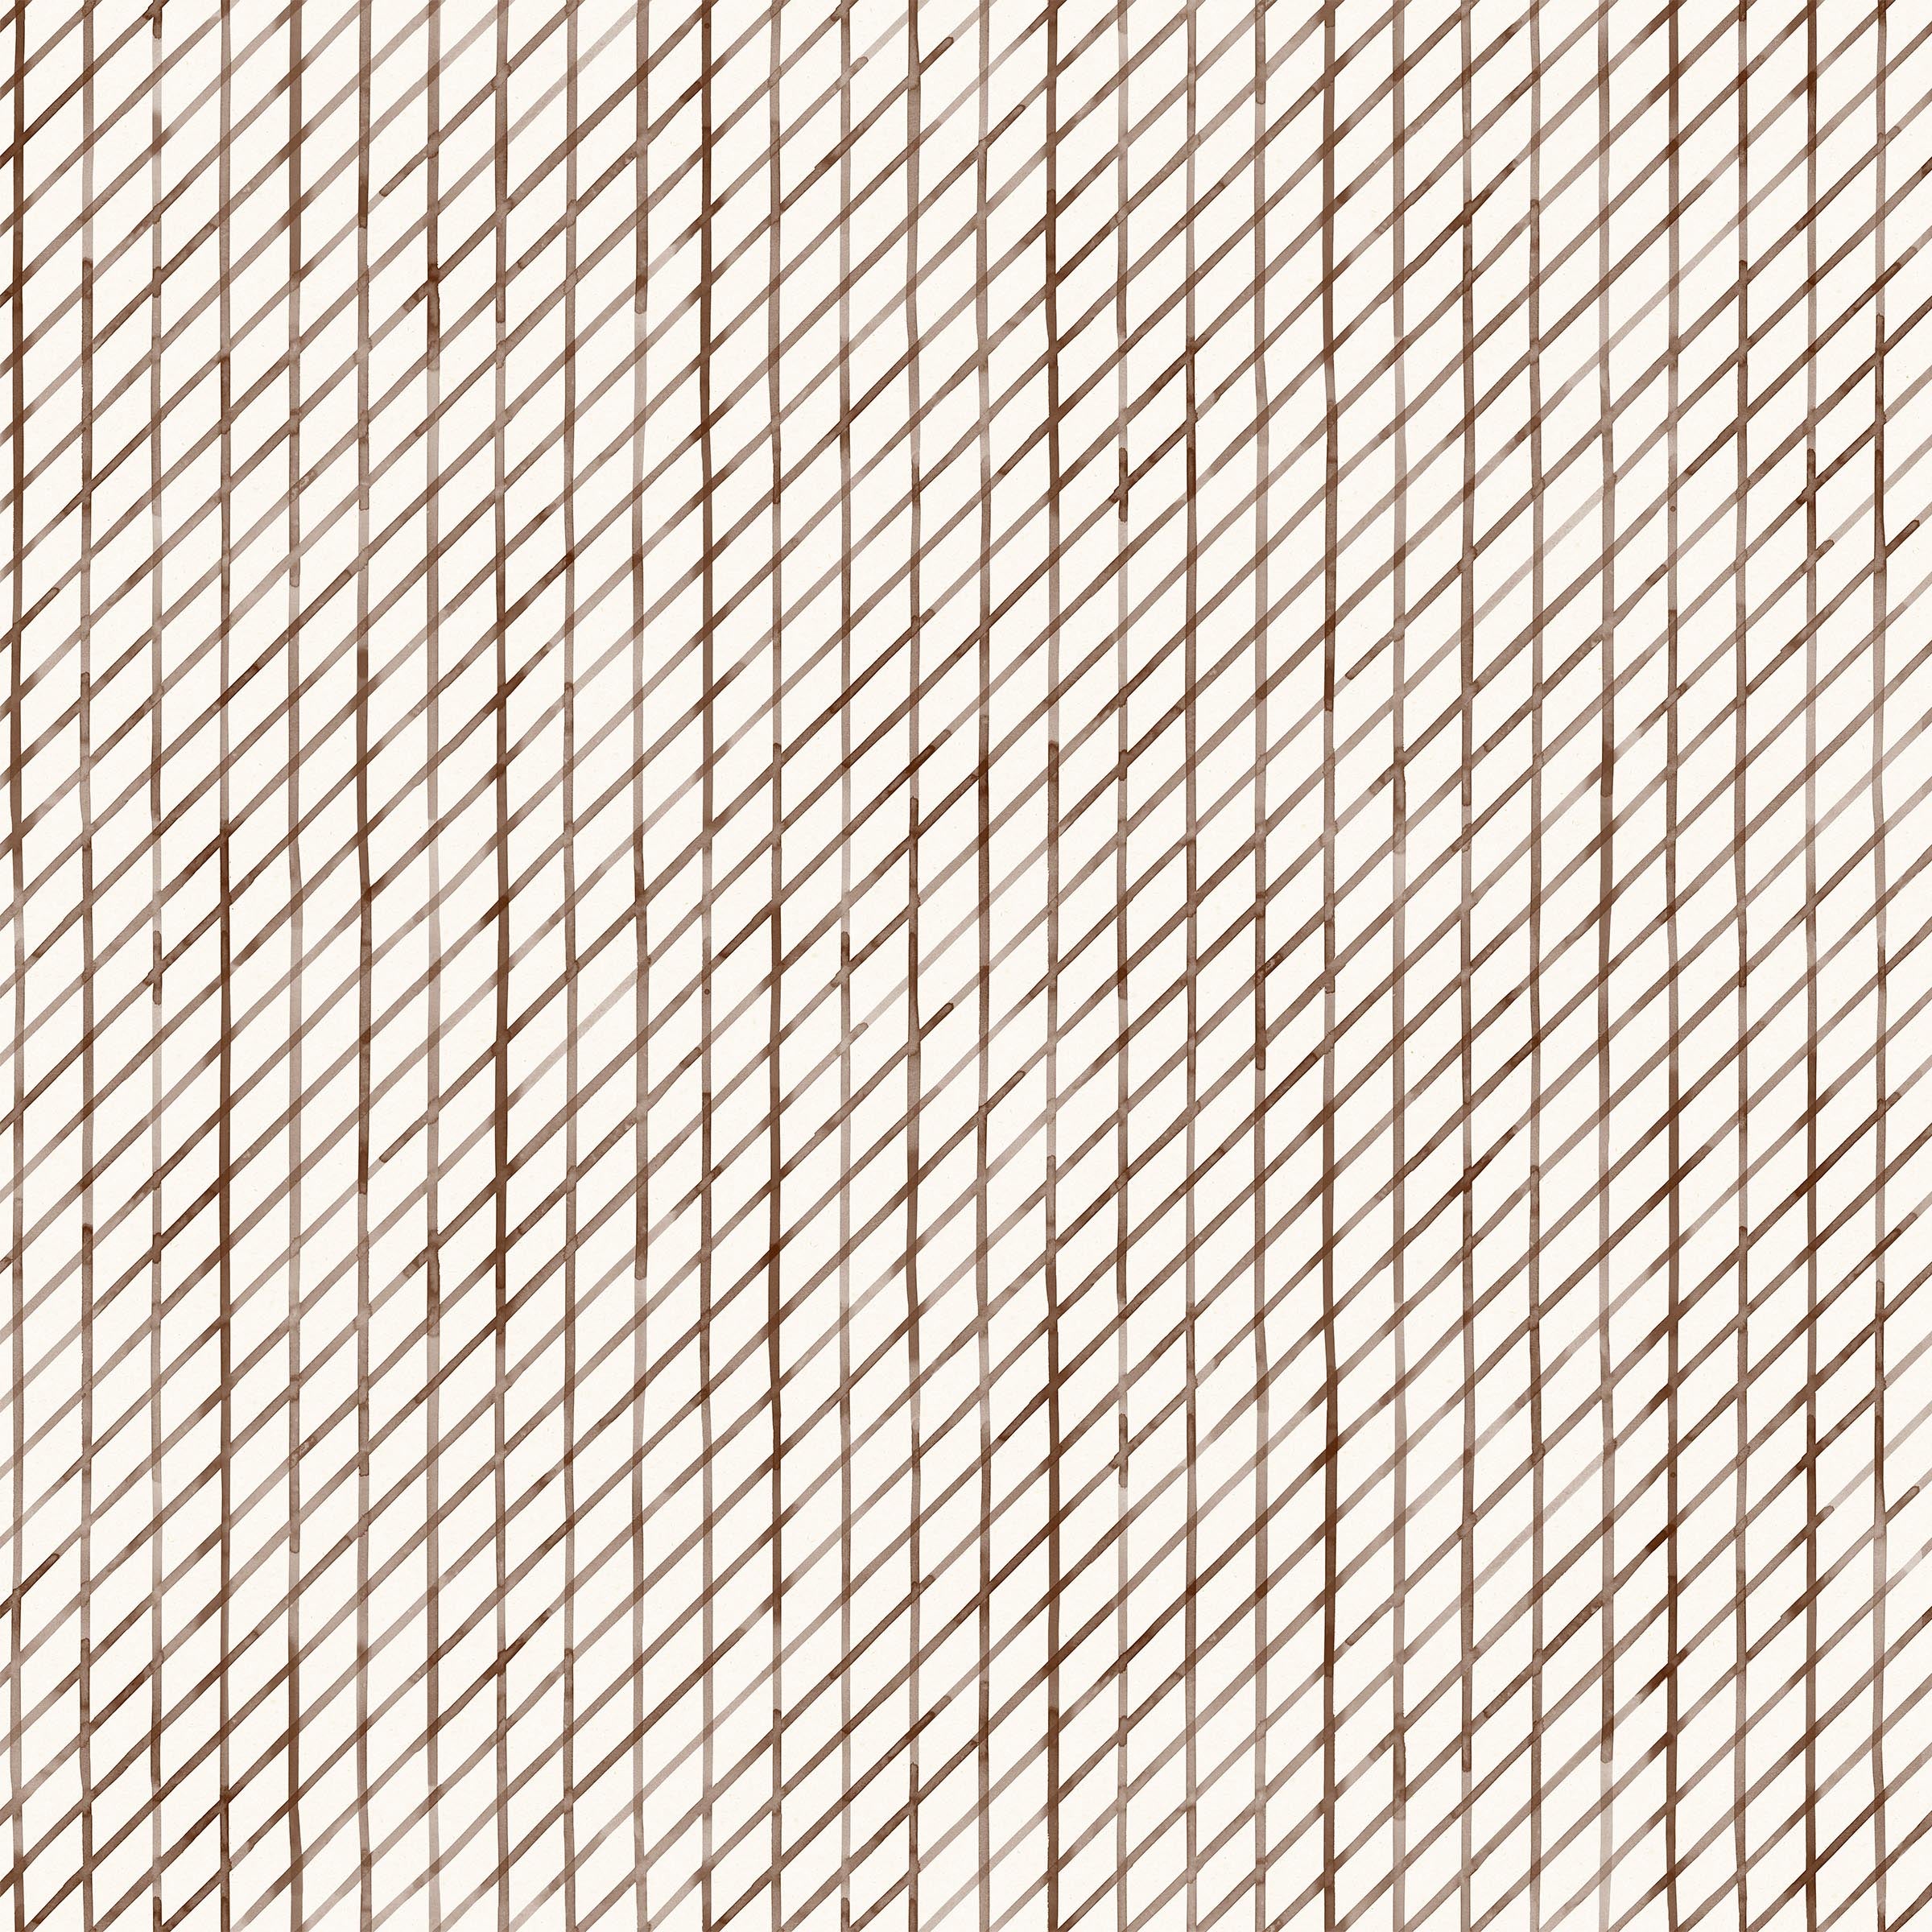 Detail of wallpaper in a painterly uneven grid pattern in brown on a white field.